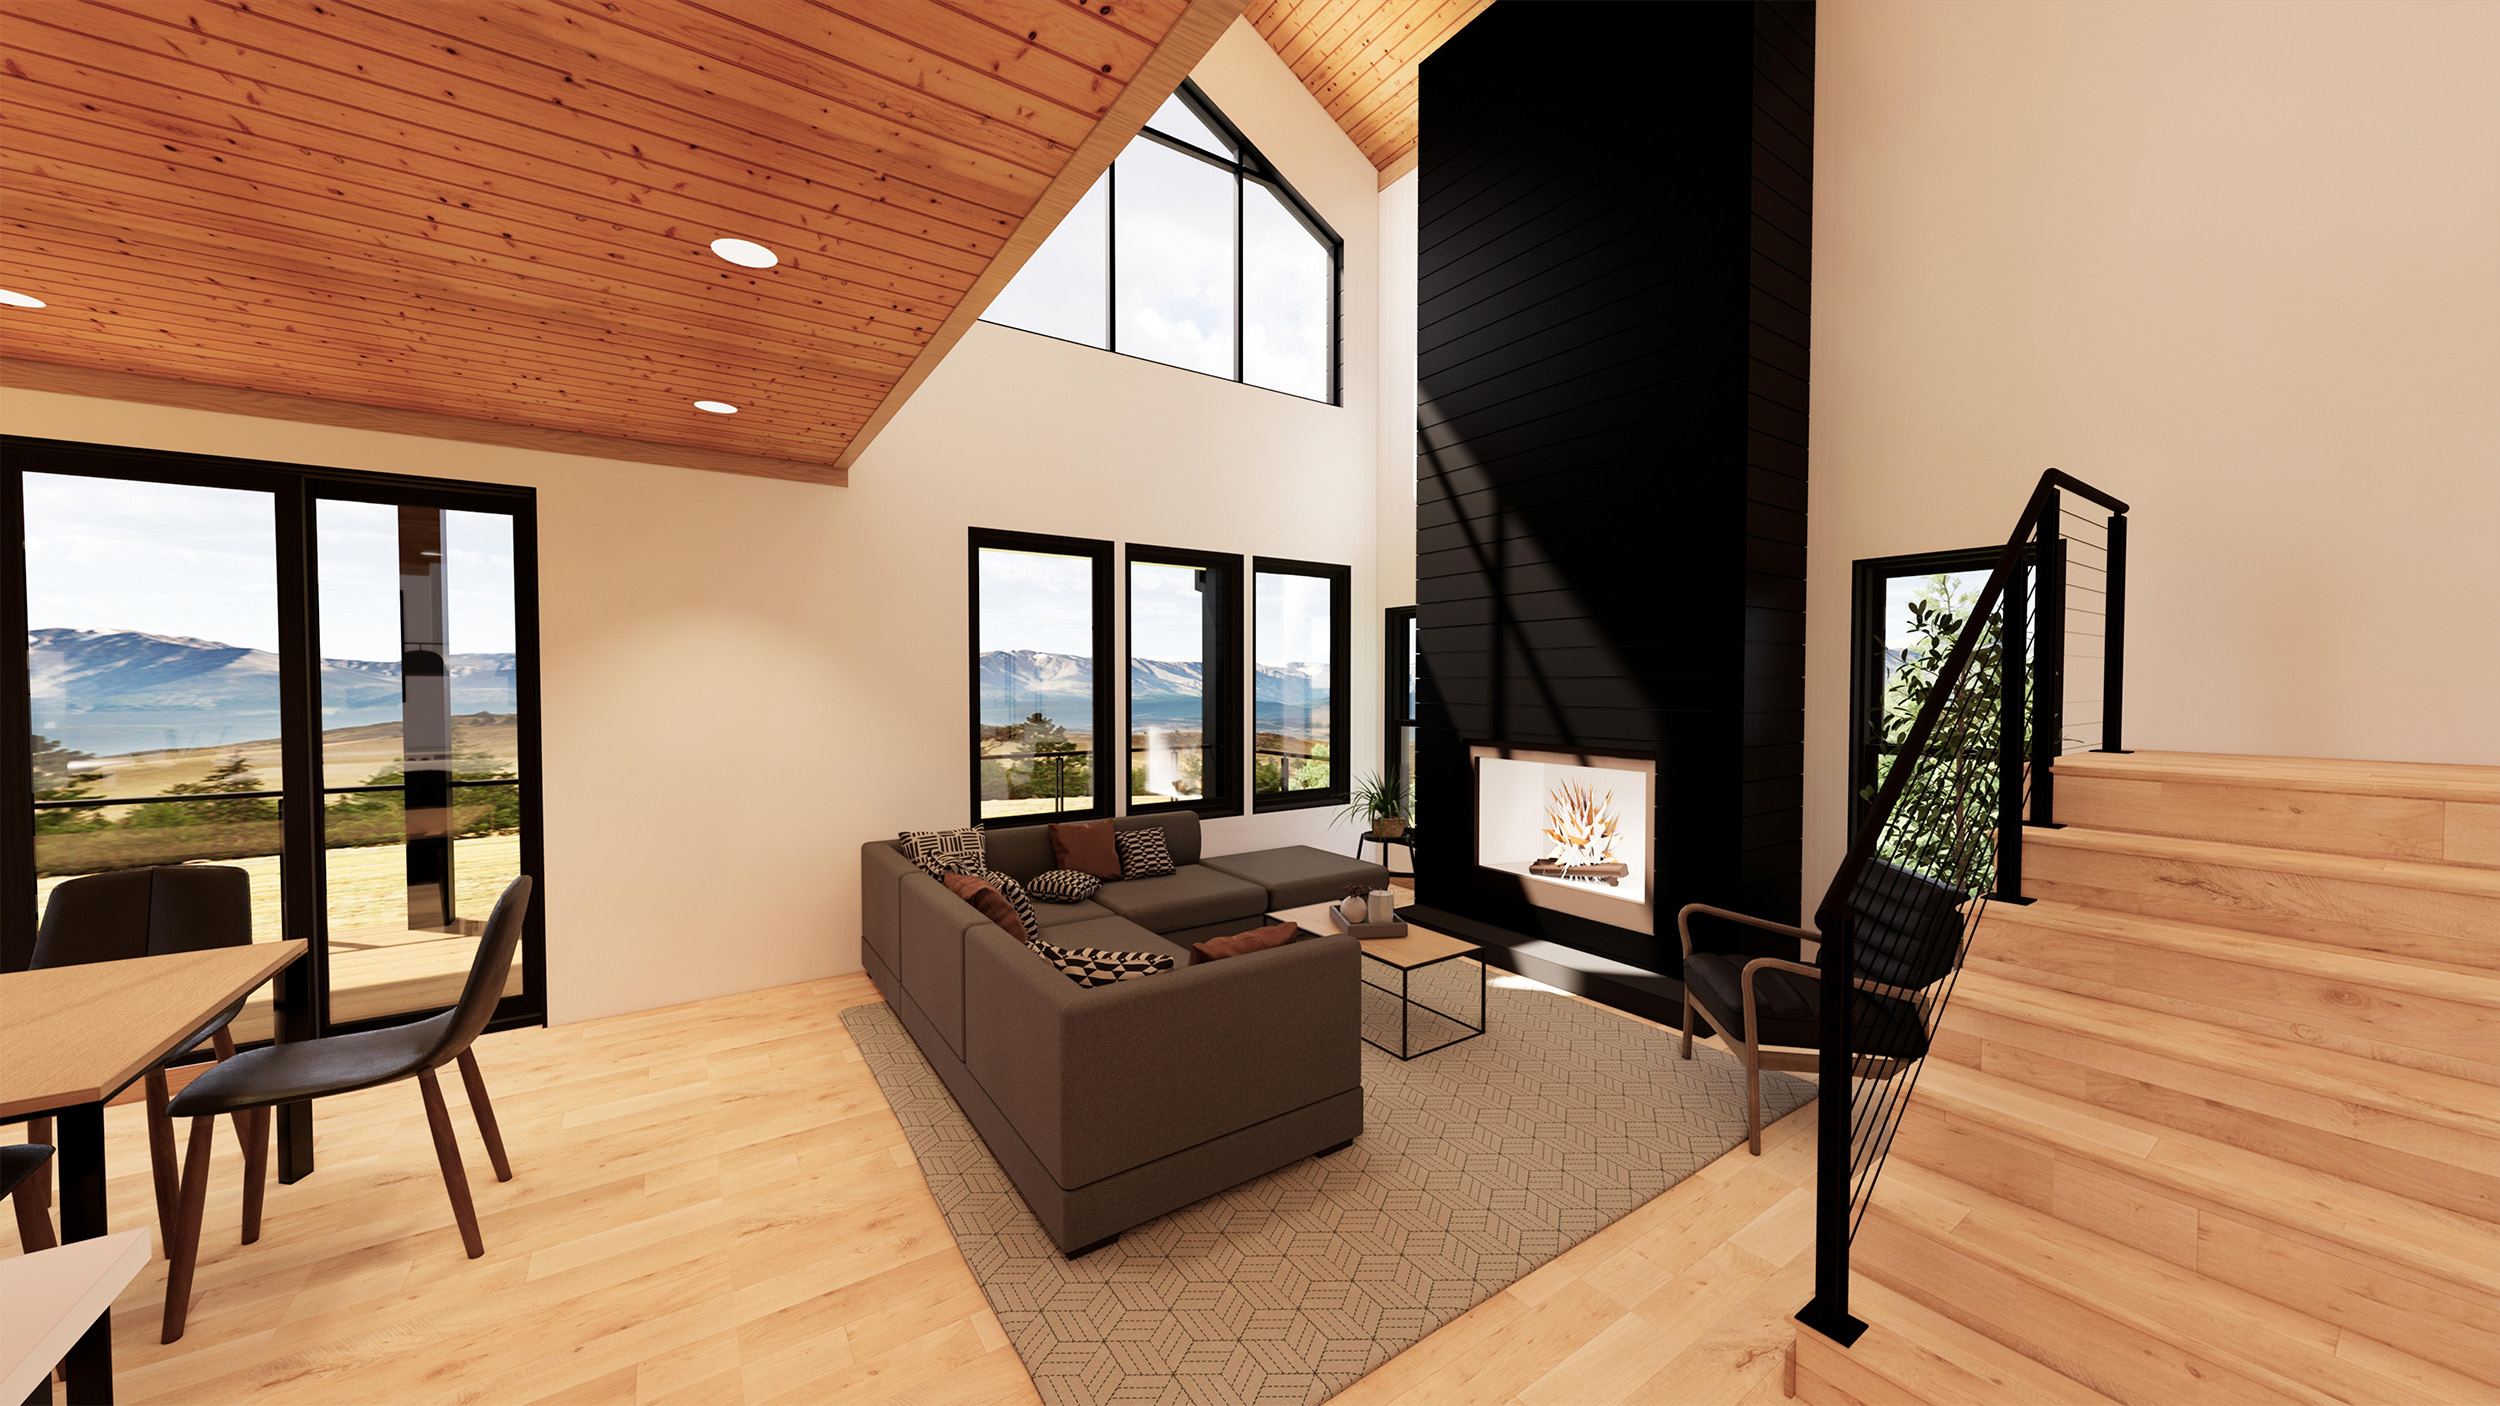 Mock up of the interior living area of the 4-5 bedroom cabins in the lodges at reedmont